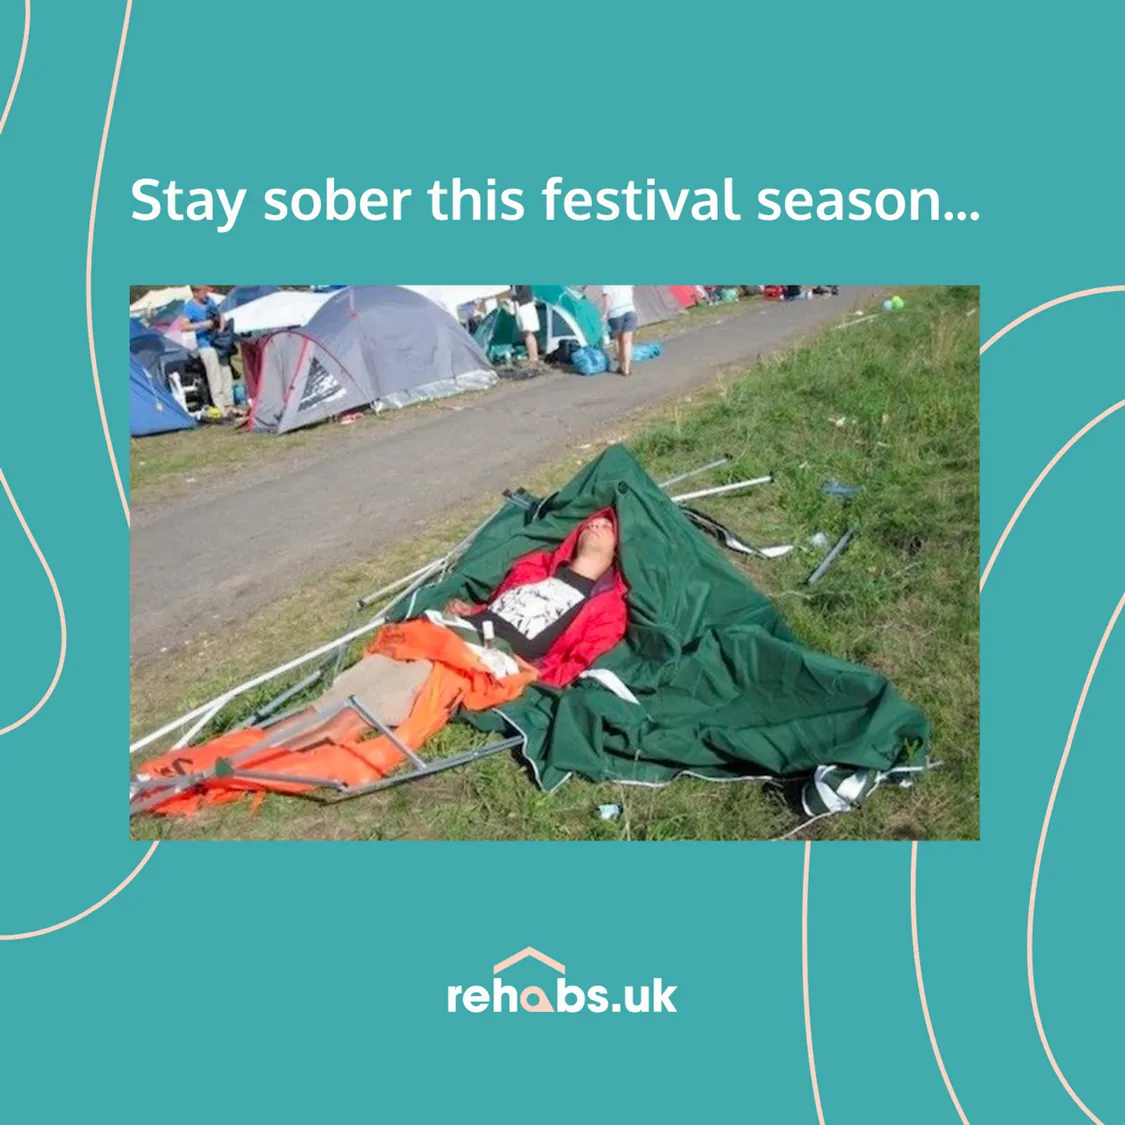 Meme of a drunk man at a festival, he's sleeping onto of his broken tent. The quote above reads "Stay sober this festival season"